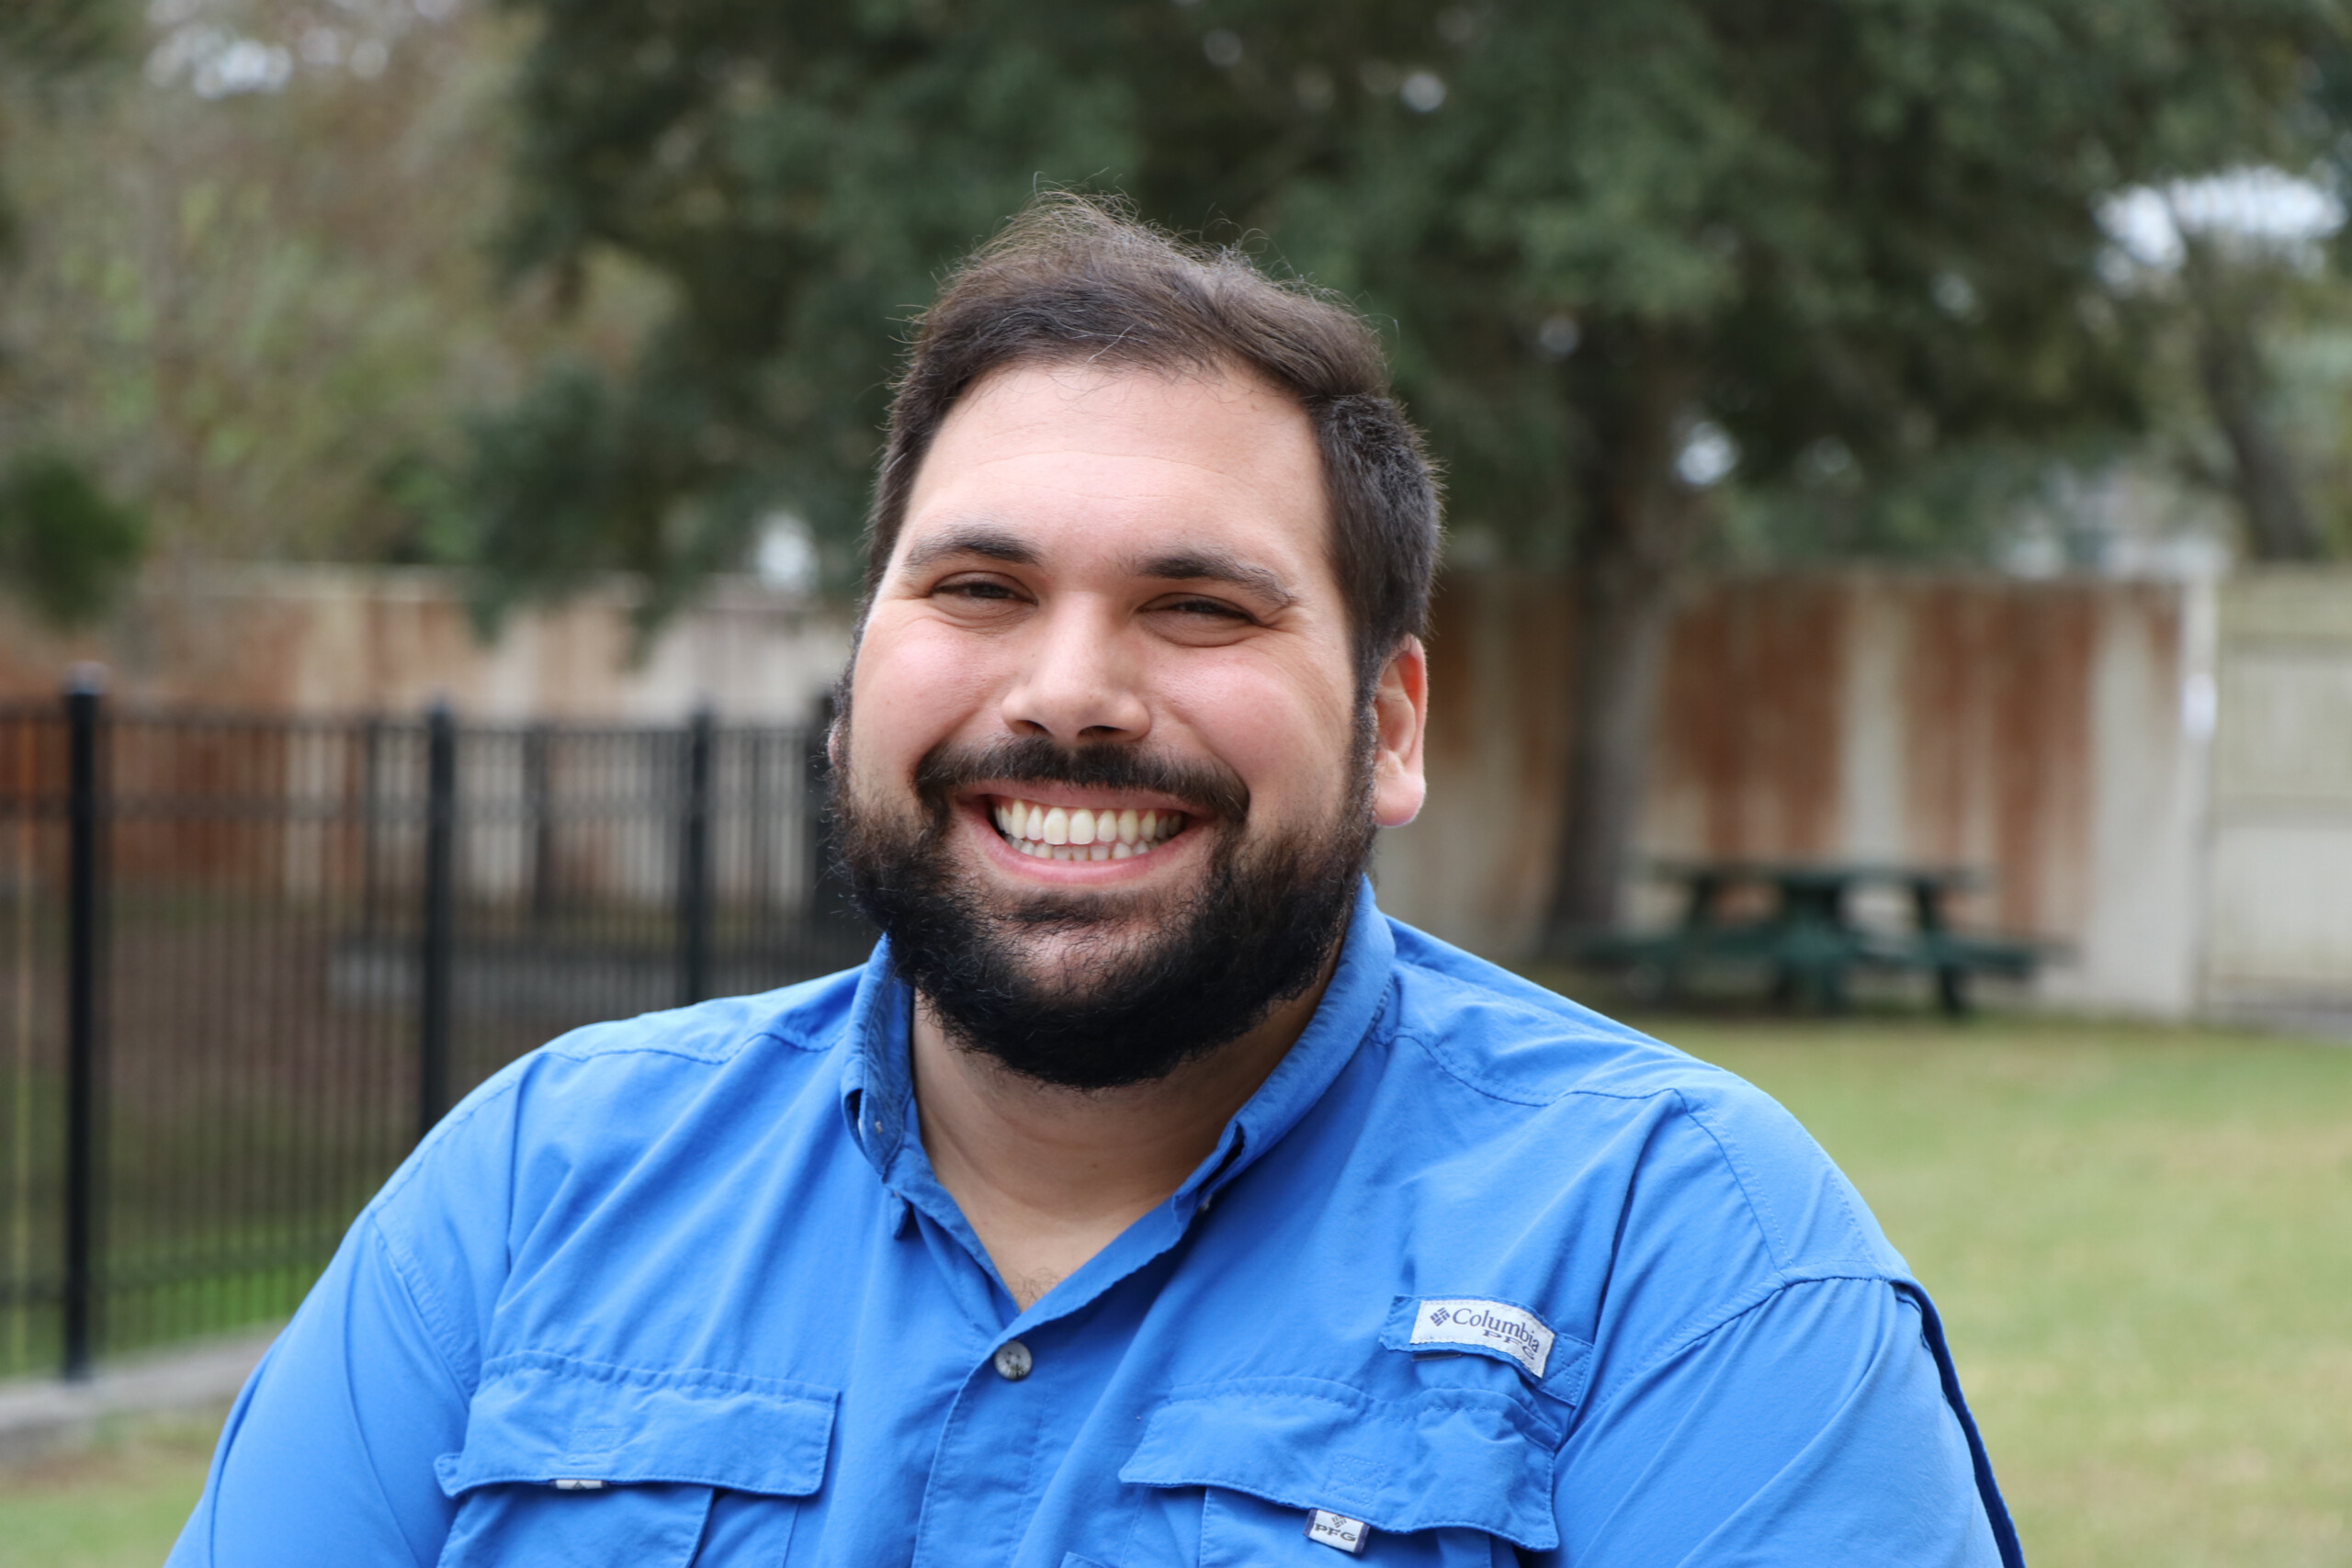 A man with a beard smiling in a blue shirt.